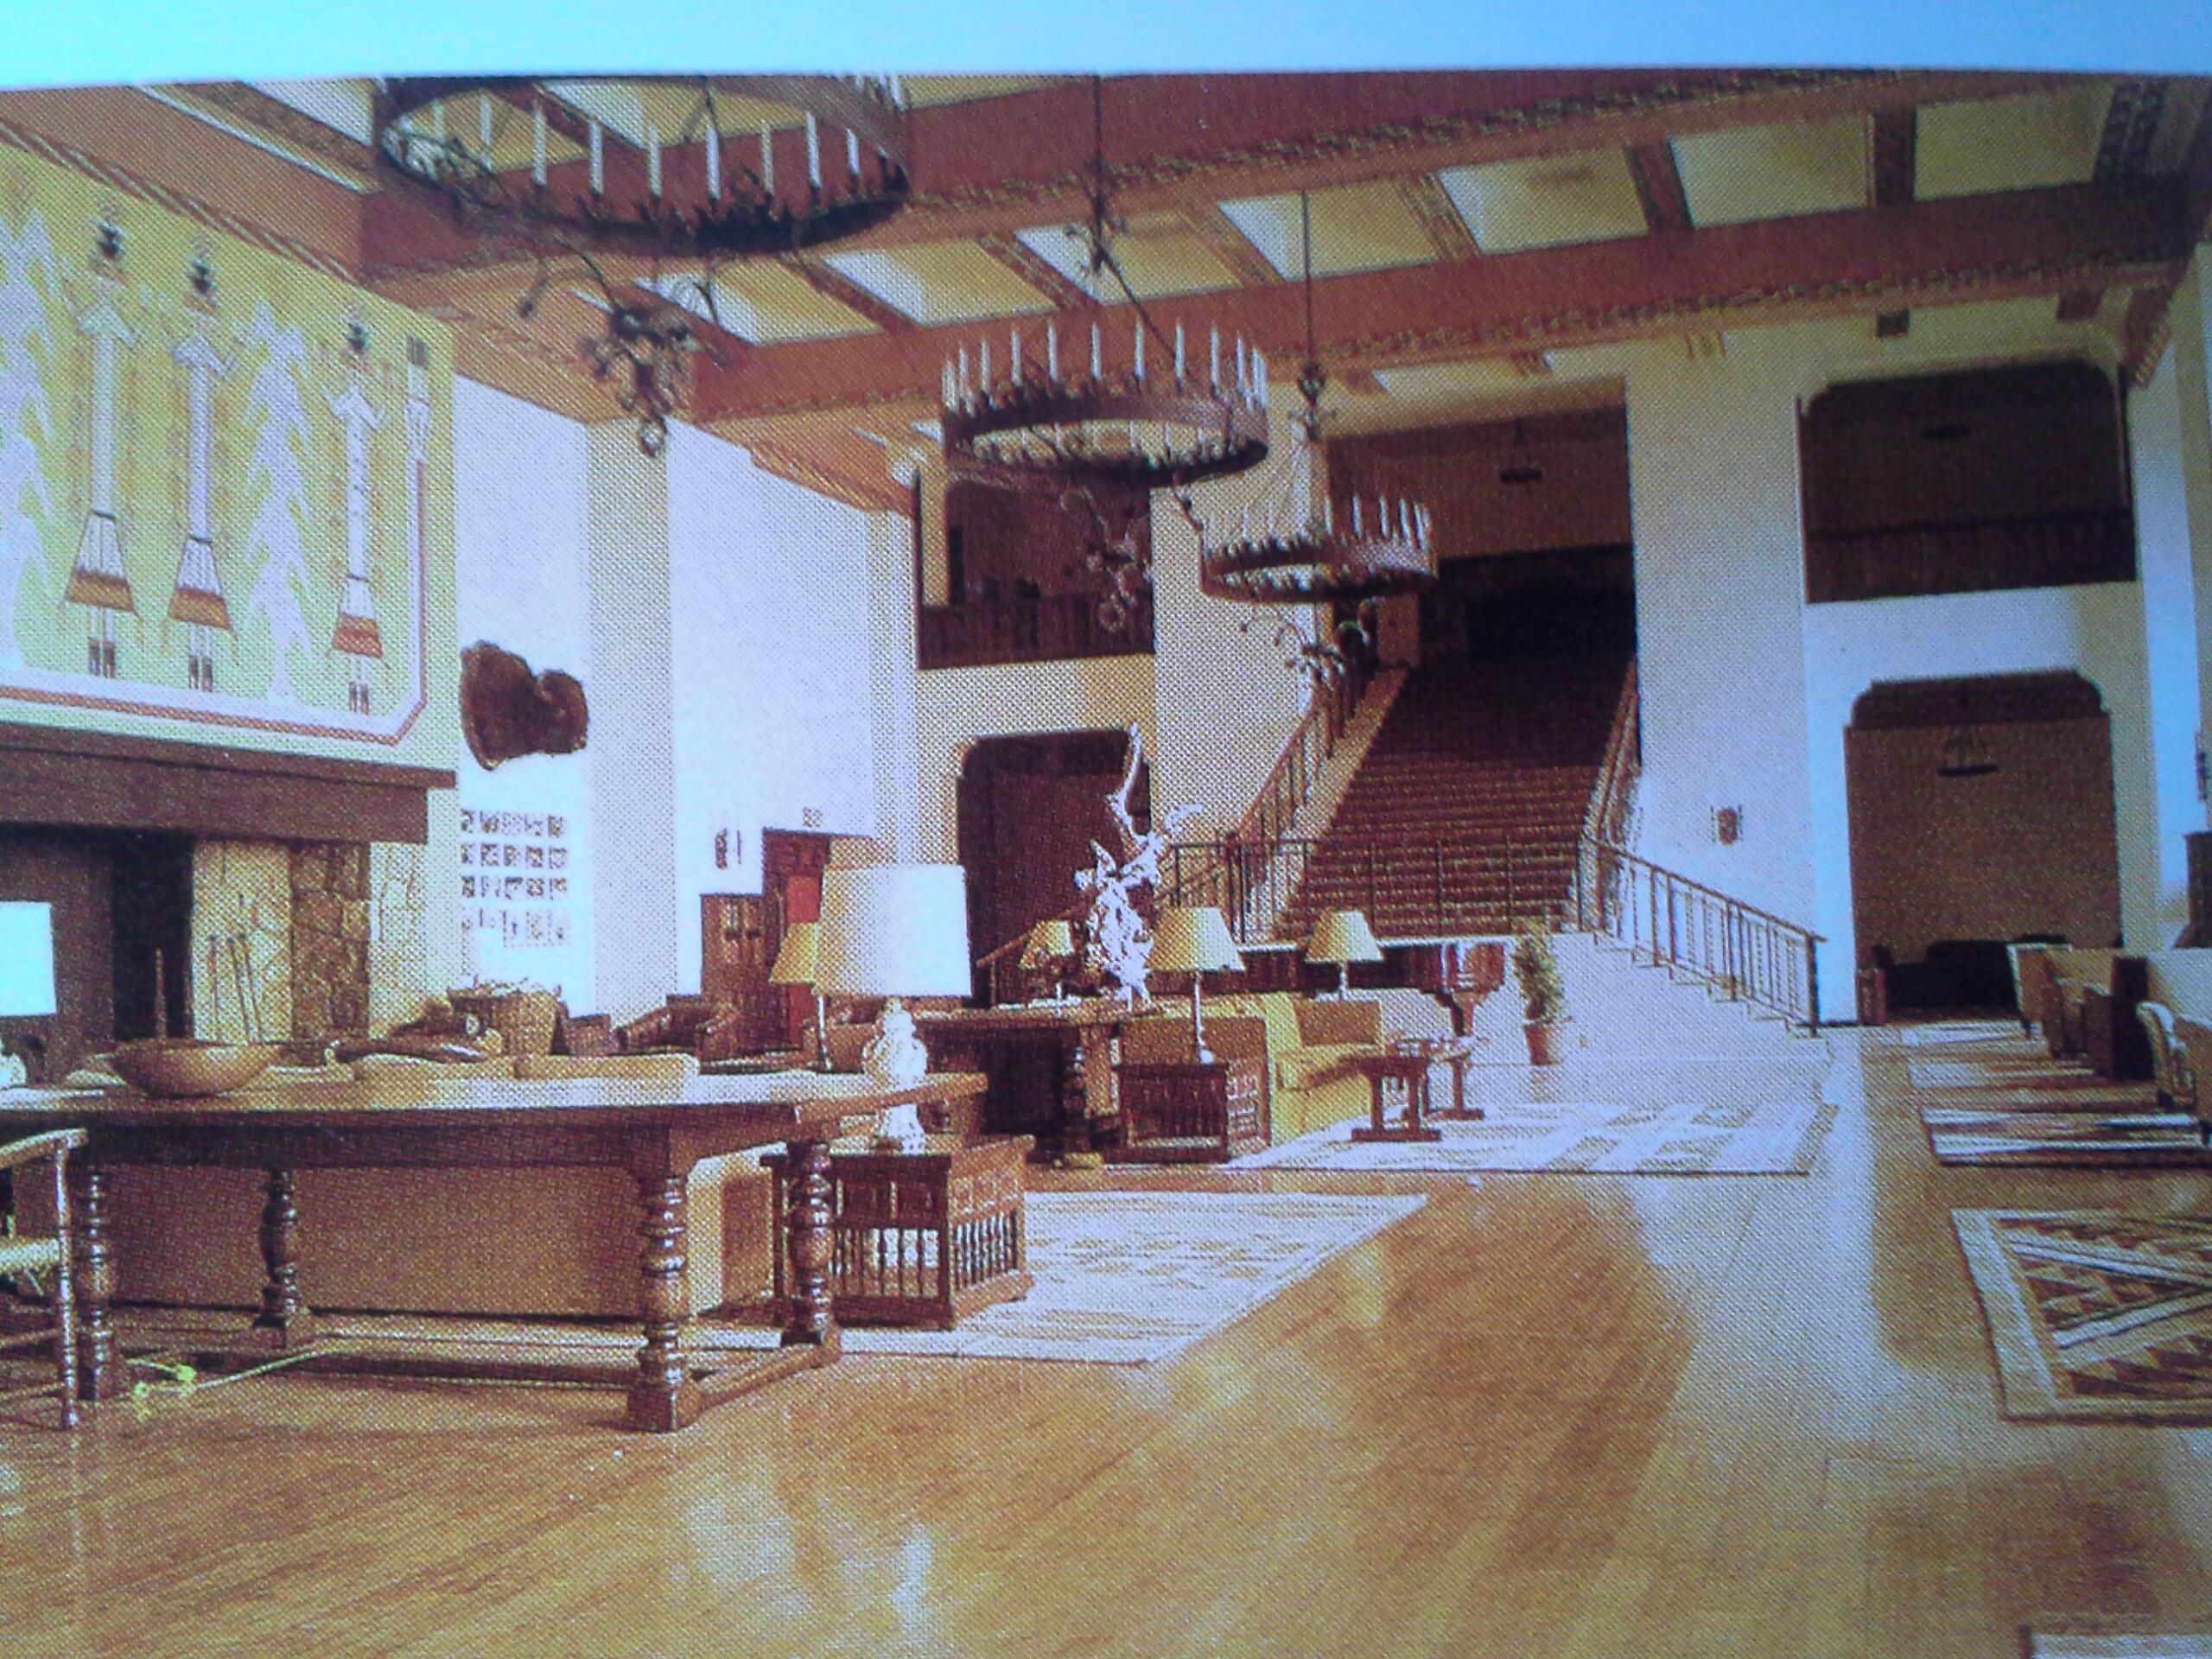 McCrabb Twitter: "THE SHINING: Location photo of the Ahwahnee Hotel used to design the interior of The Colorado Lounge set . http://t.co/lsBQato6Qc" / Twitter